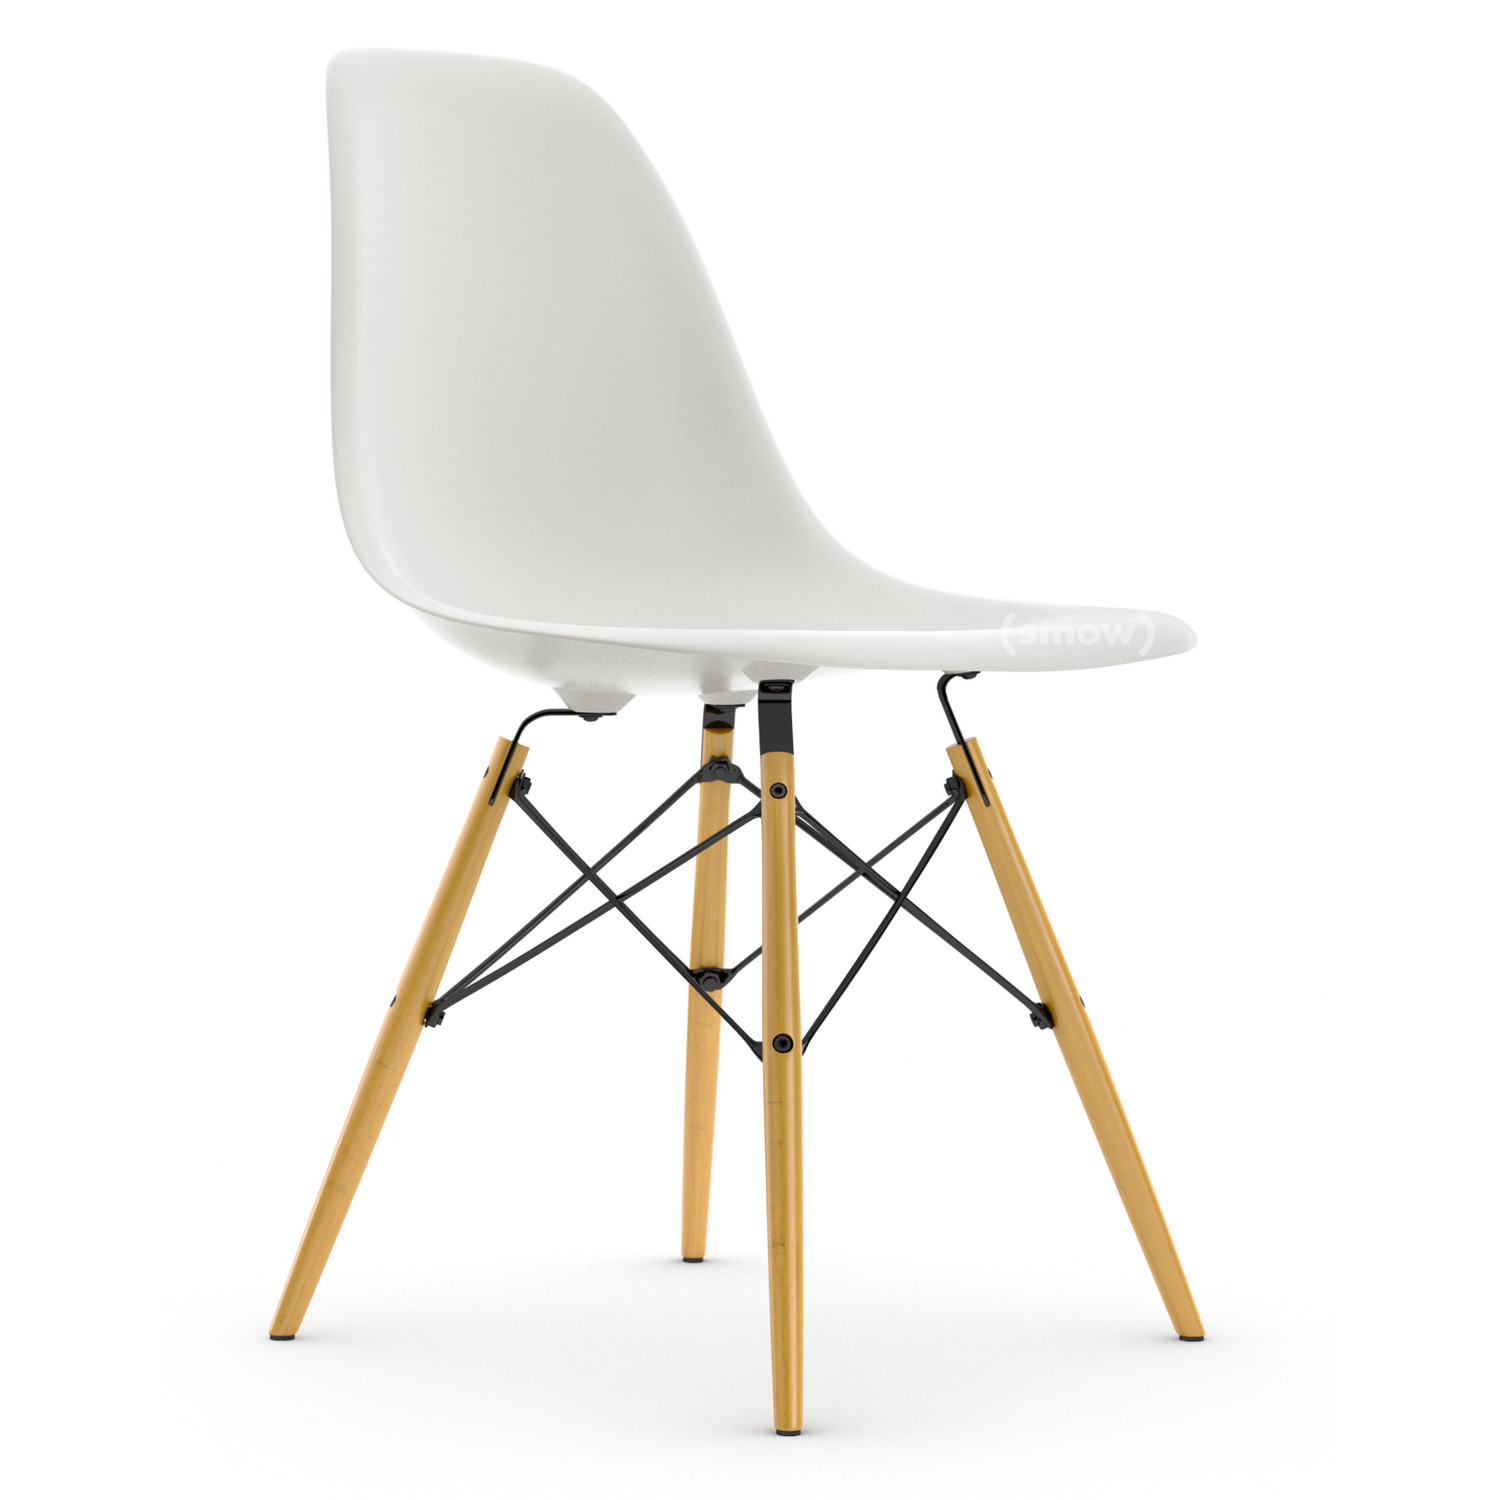 Vitra Eames Plastic Side Chair Dsw White Without Upholstery Without Upholstery Standard Version 43 Cm Yellowish Maple By Charles Ray Eames 1950 Designer Furniture By Smow Com